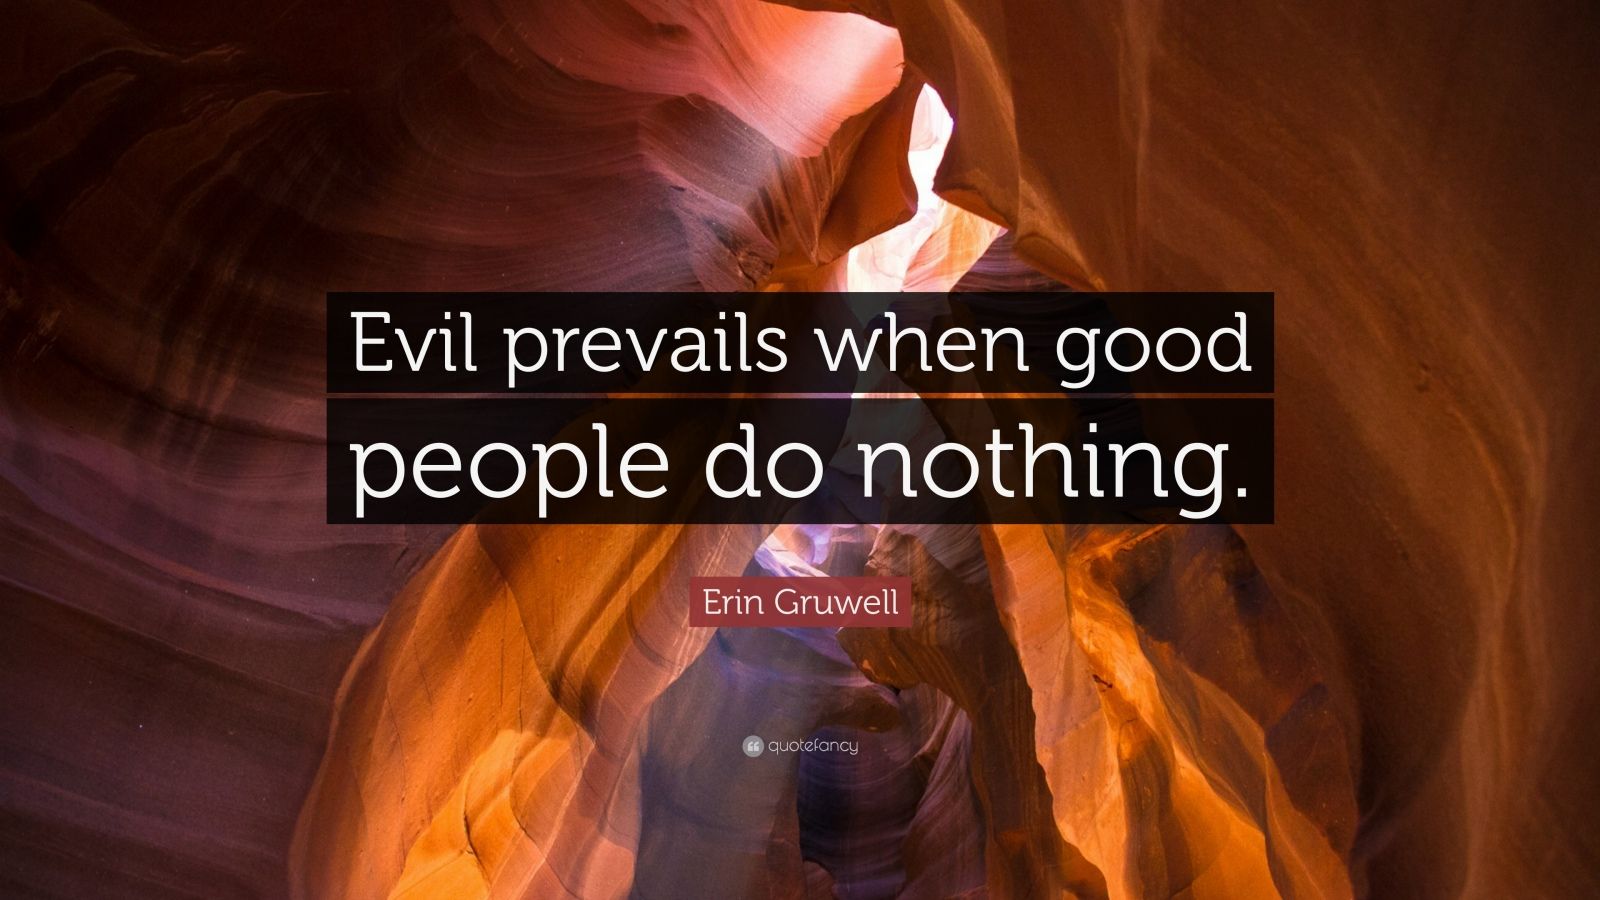 Erin Gruwell Quote: “Evil prevails when good people do nothing.” (10